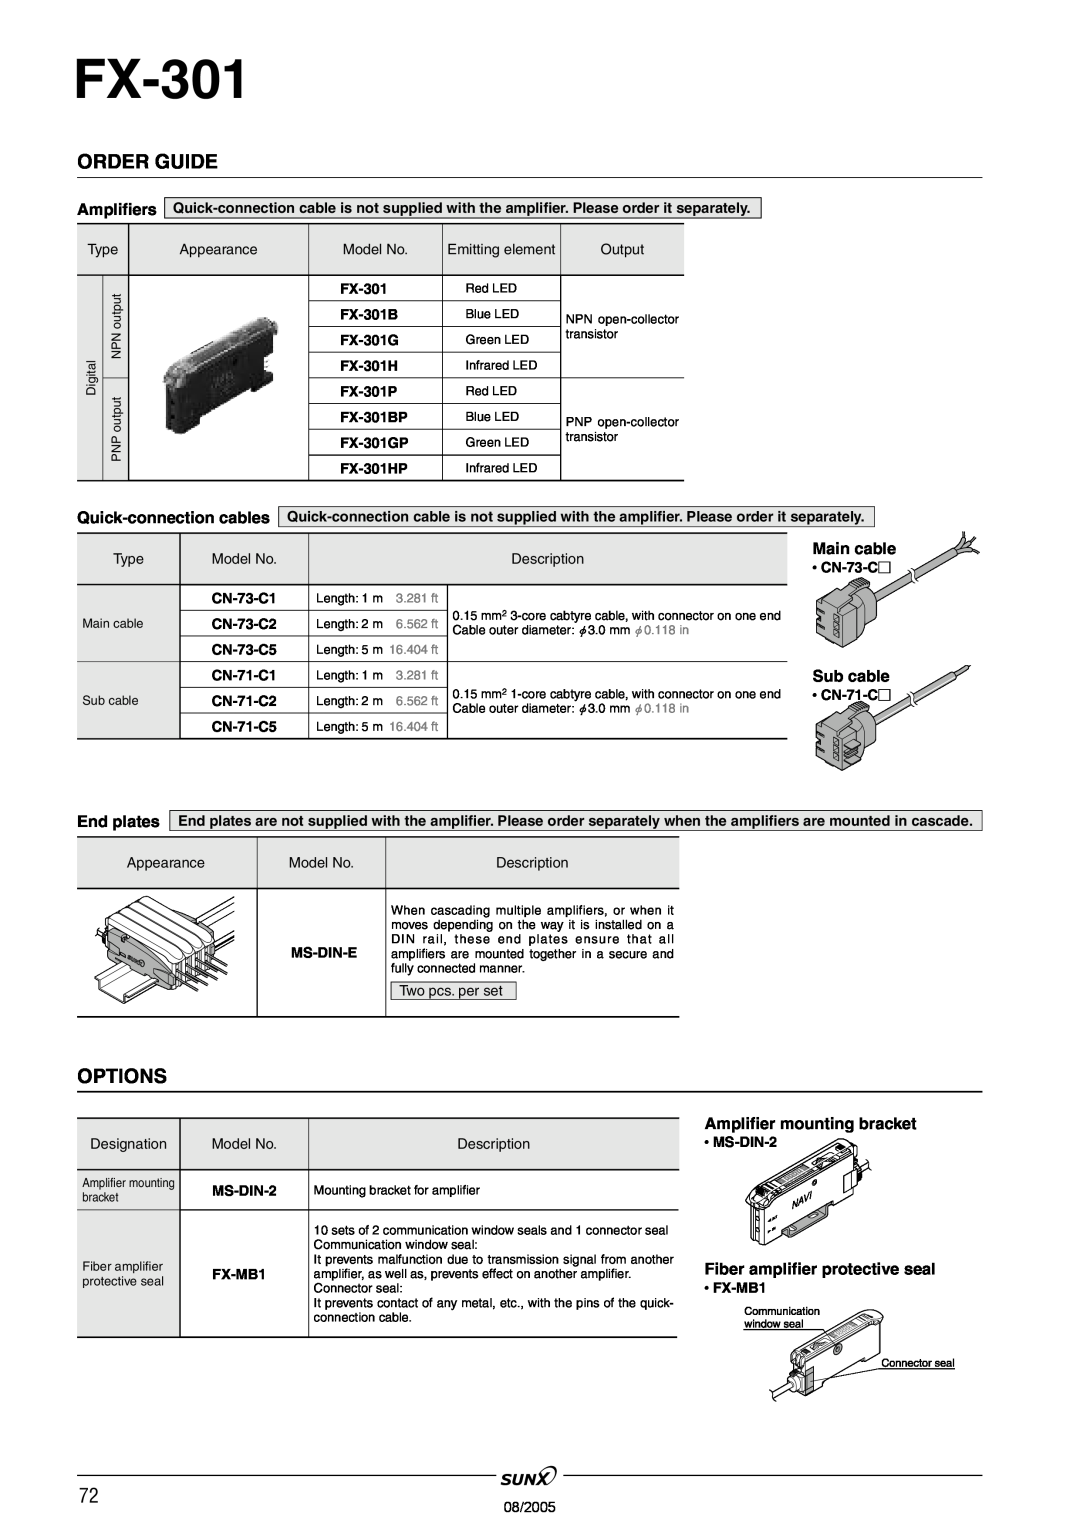 Panasonic Order Guide, Options, Amplifiers, Quick-connectioncables, Main cable, Sub cable, End plates, FX-301B, FX-301G 